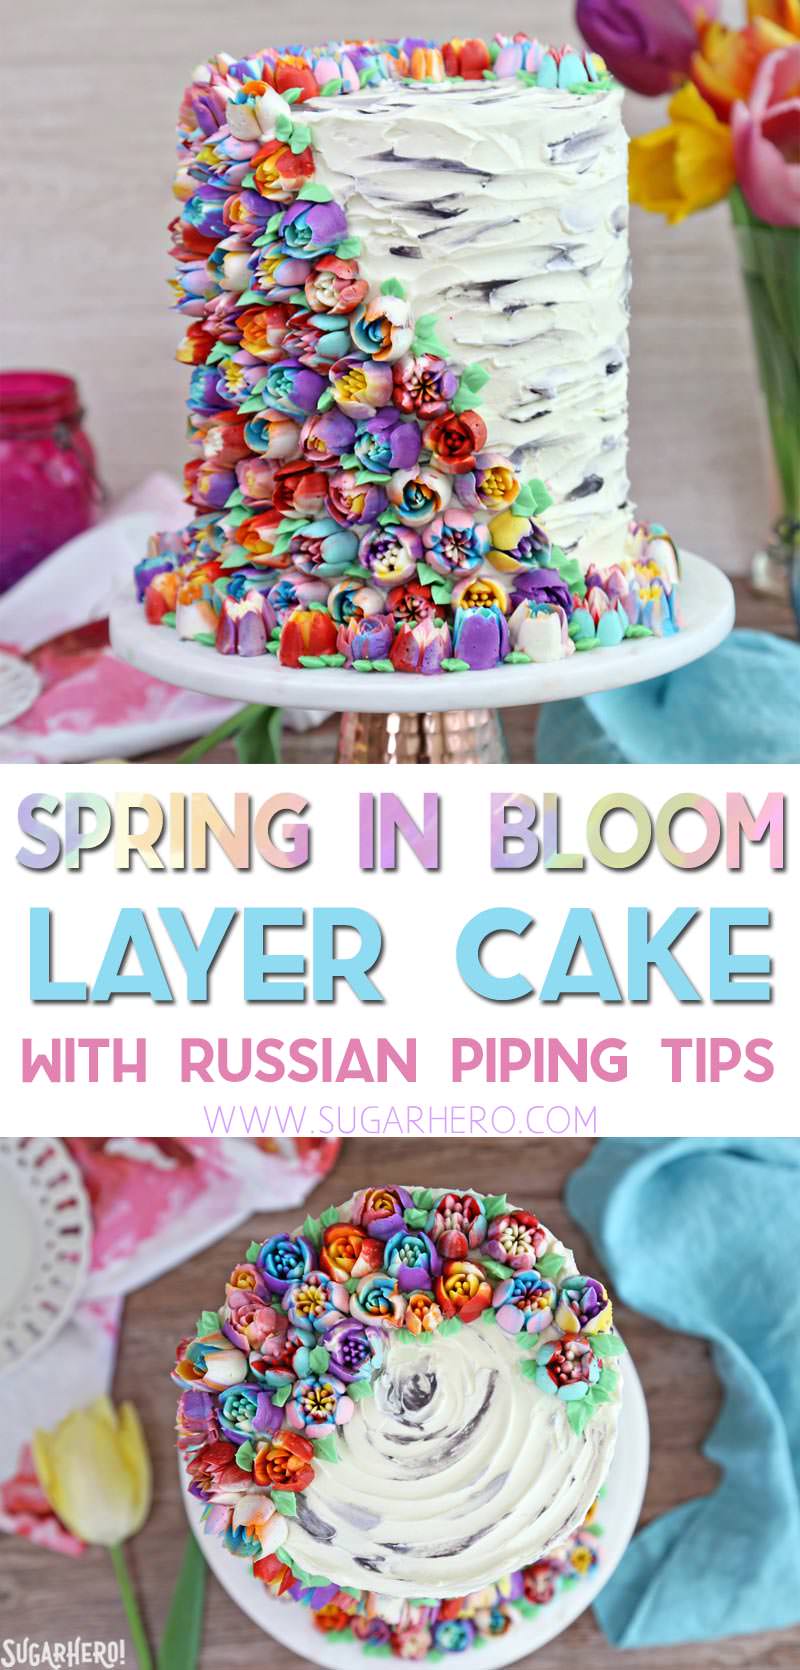 Spring In Bloom Layer Cake - an extra-tall cake COVERED in gorgeous buttercream flowers! | From SugarHero.com